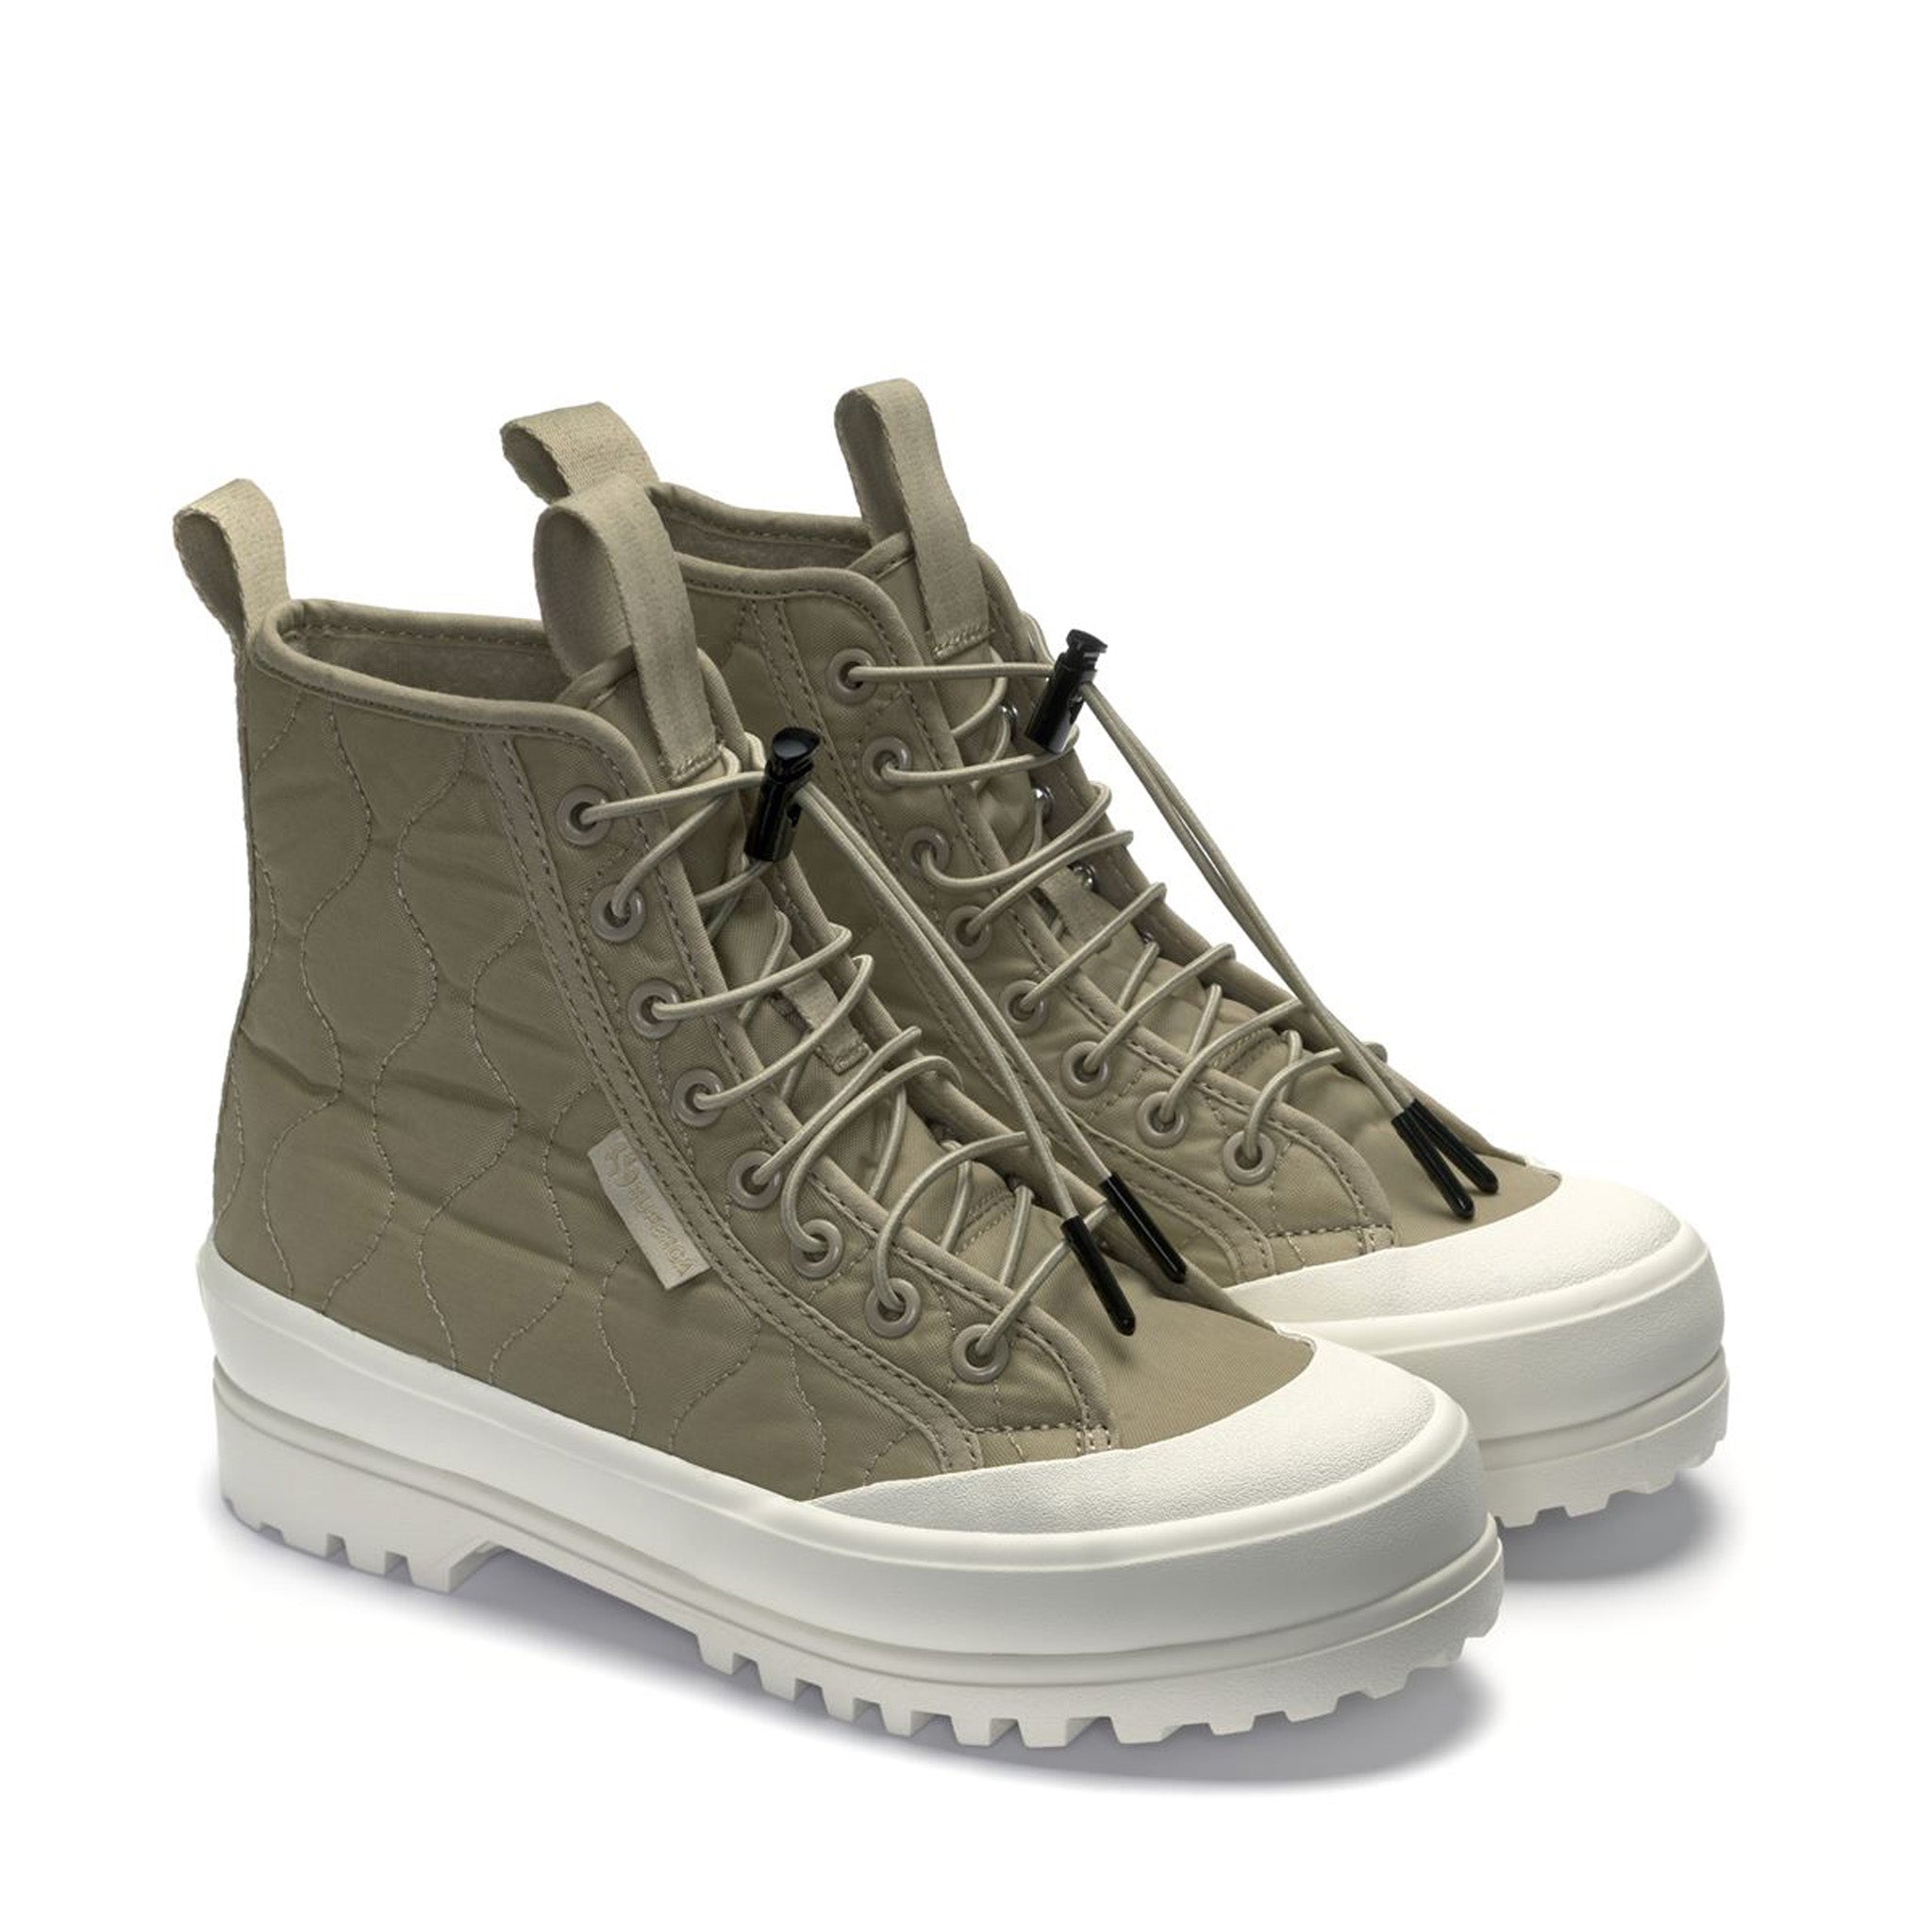 2644 Alpina Quilted Nylon Boots - Grey Fossil Avorio. Front view.